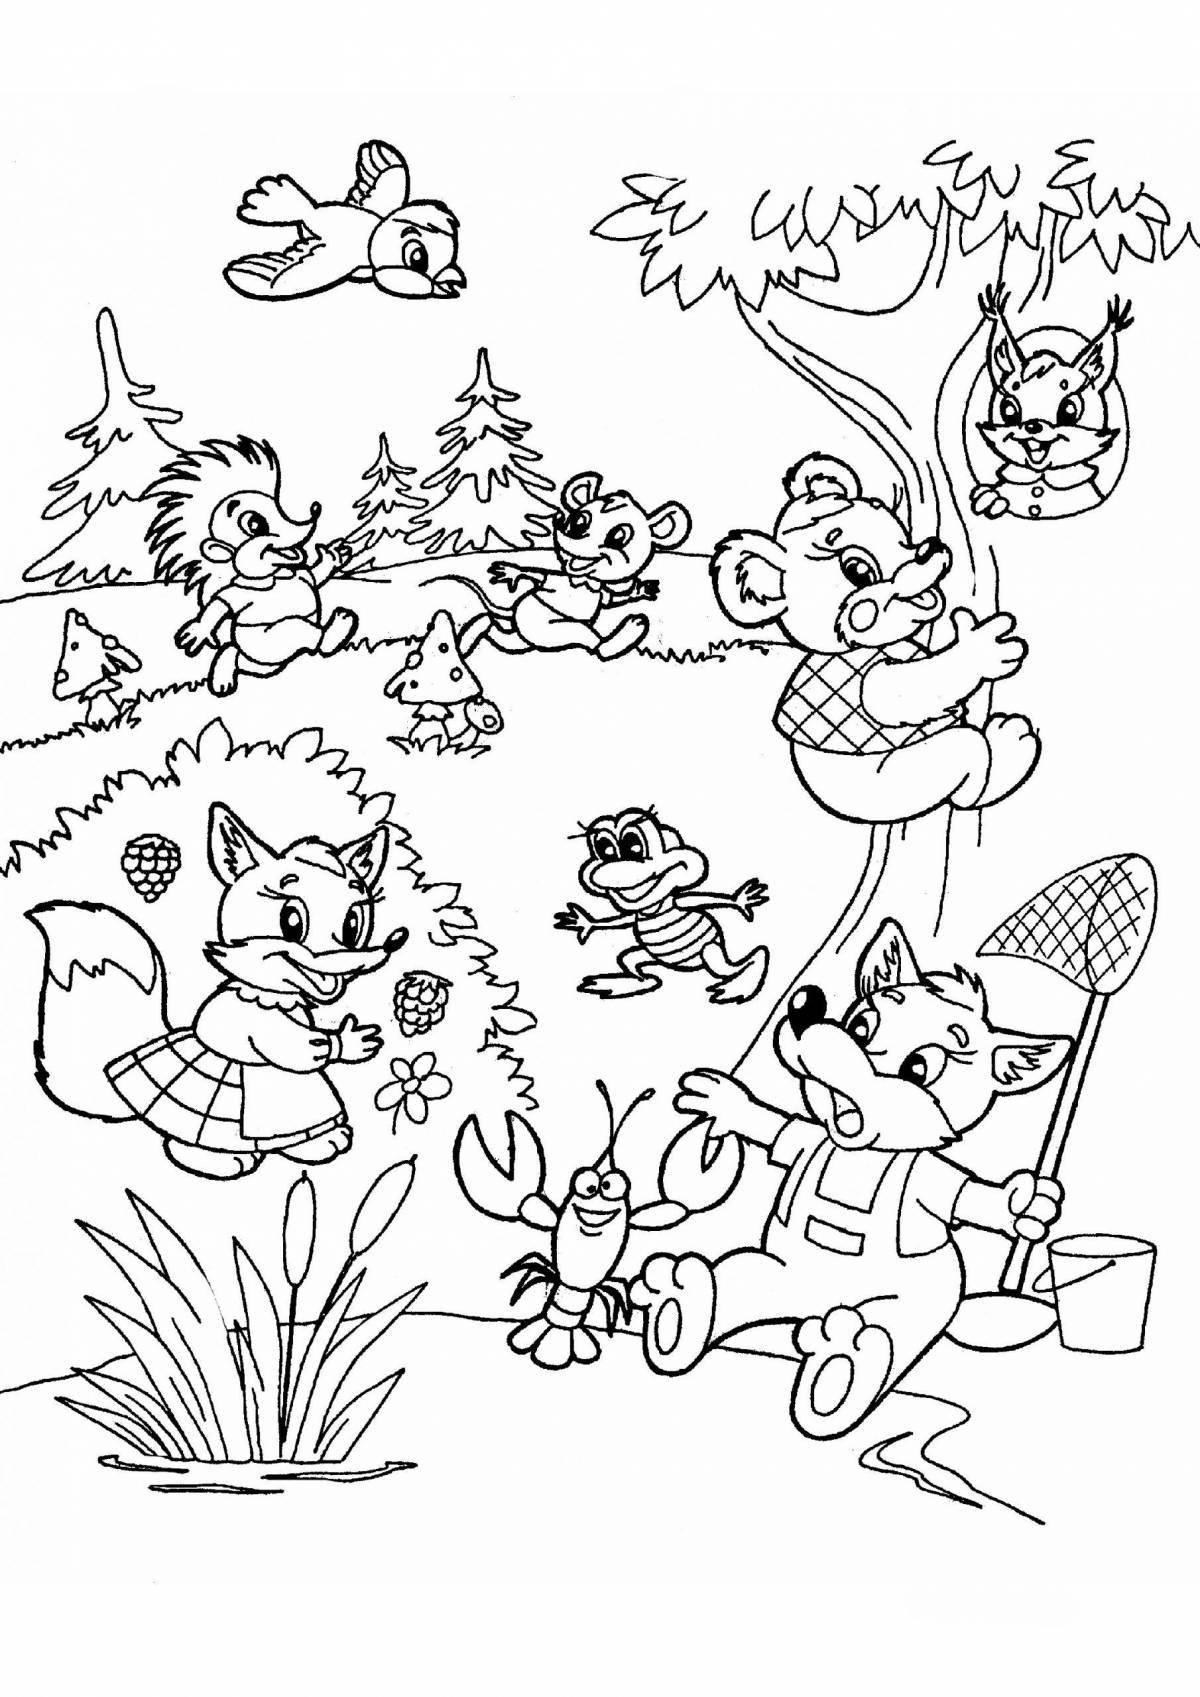 Fun coloring pages of forest animals for kids